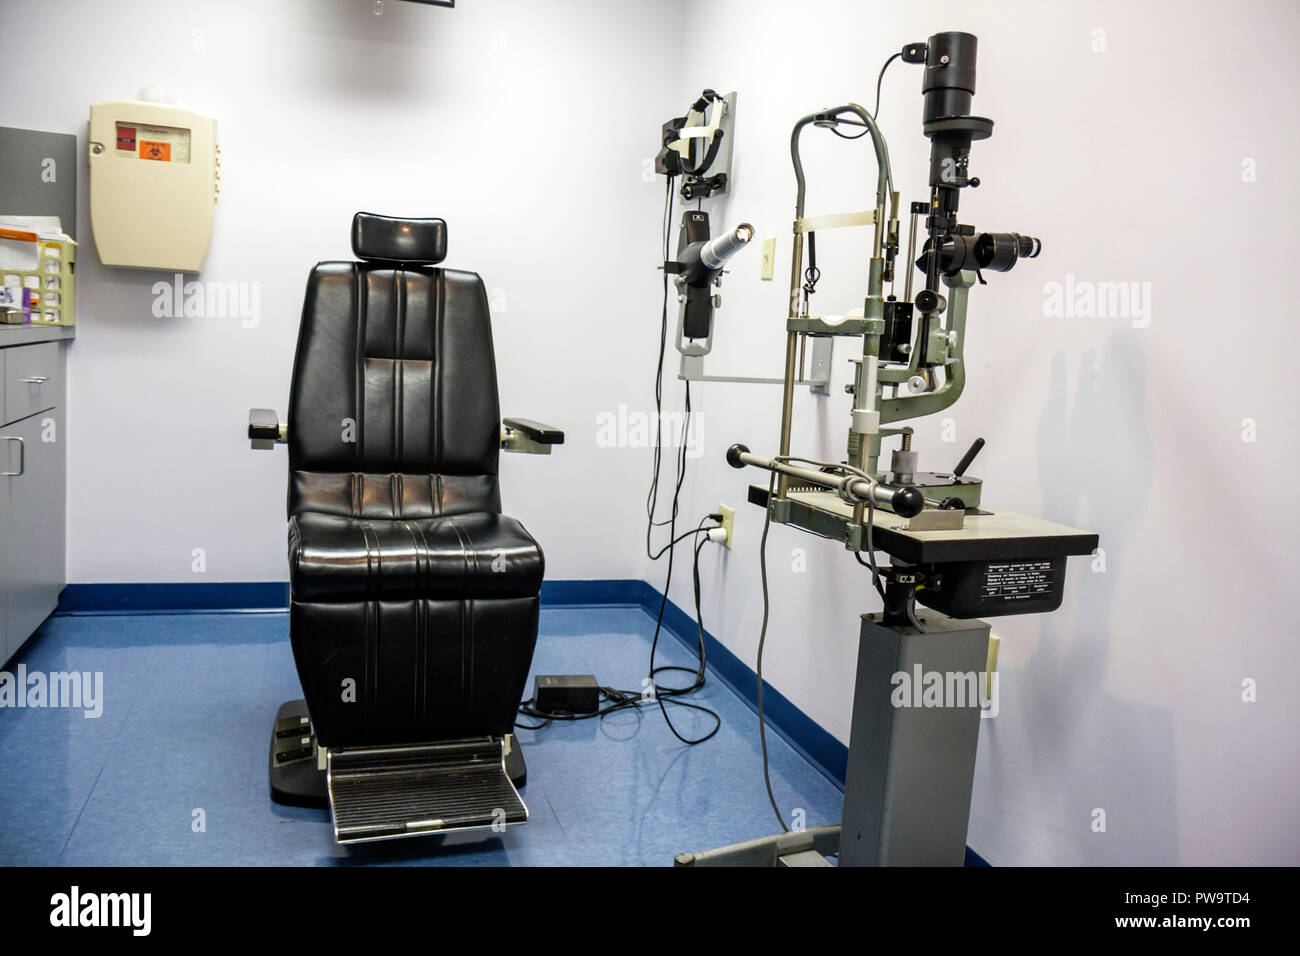 Miami Beach Florida,Mount Mt. Sinai Medical Center,hospital,healthcare,ophthalmologist,ophthalmology,vision,exam room,chair,scope,medical equipment,in Stock Photo